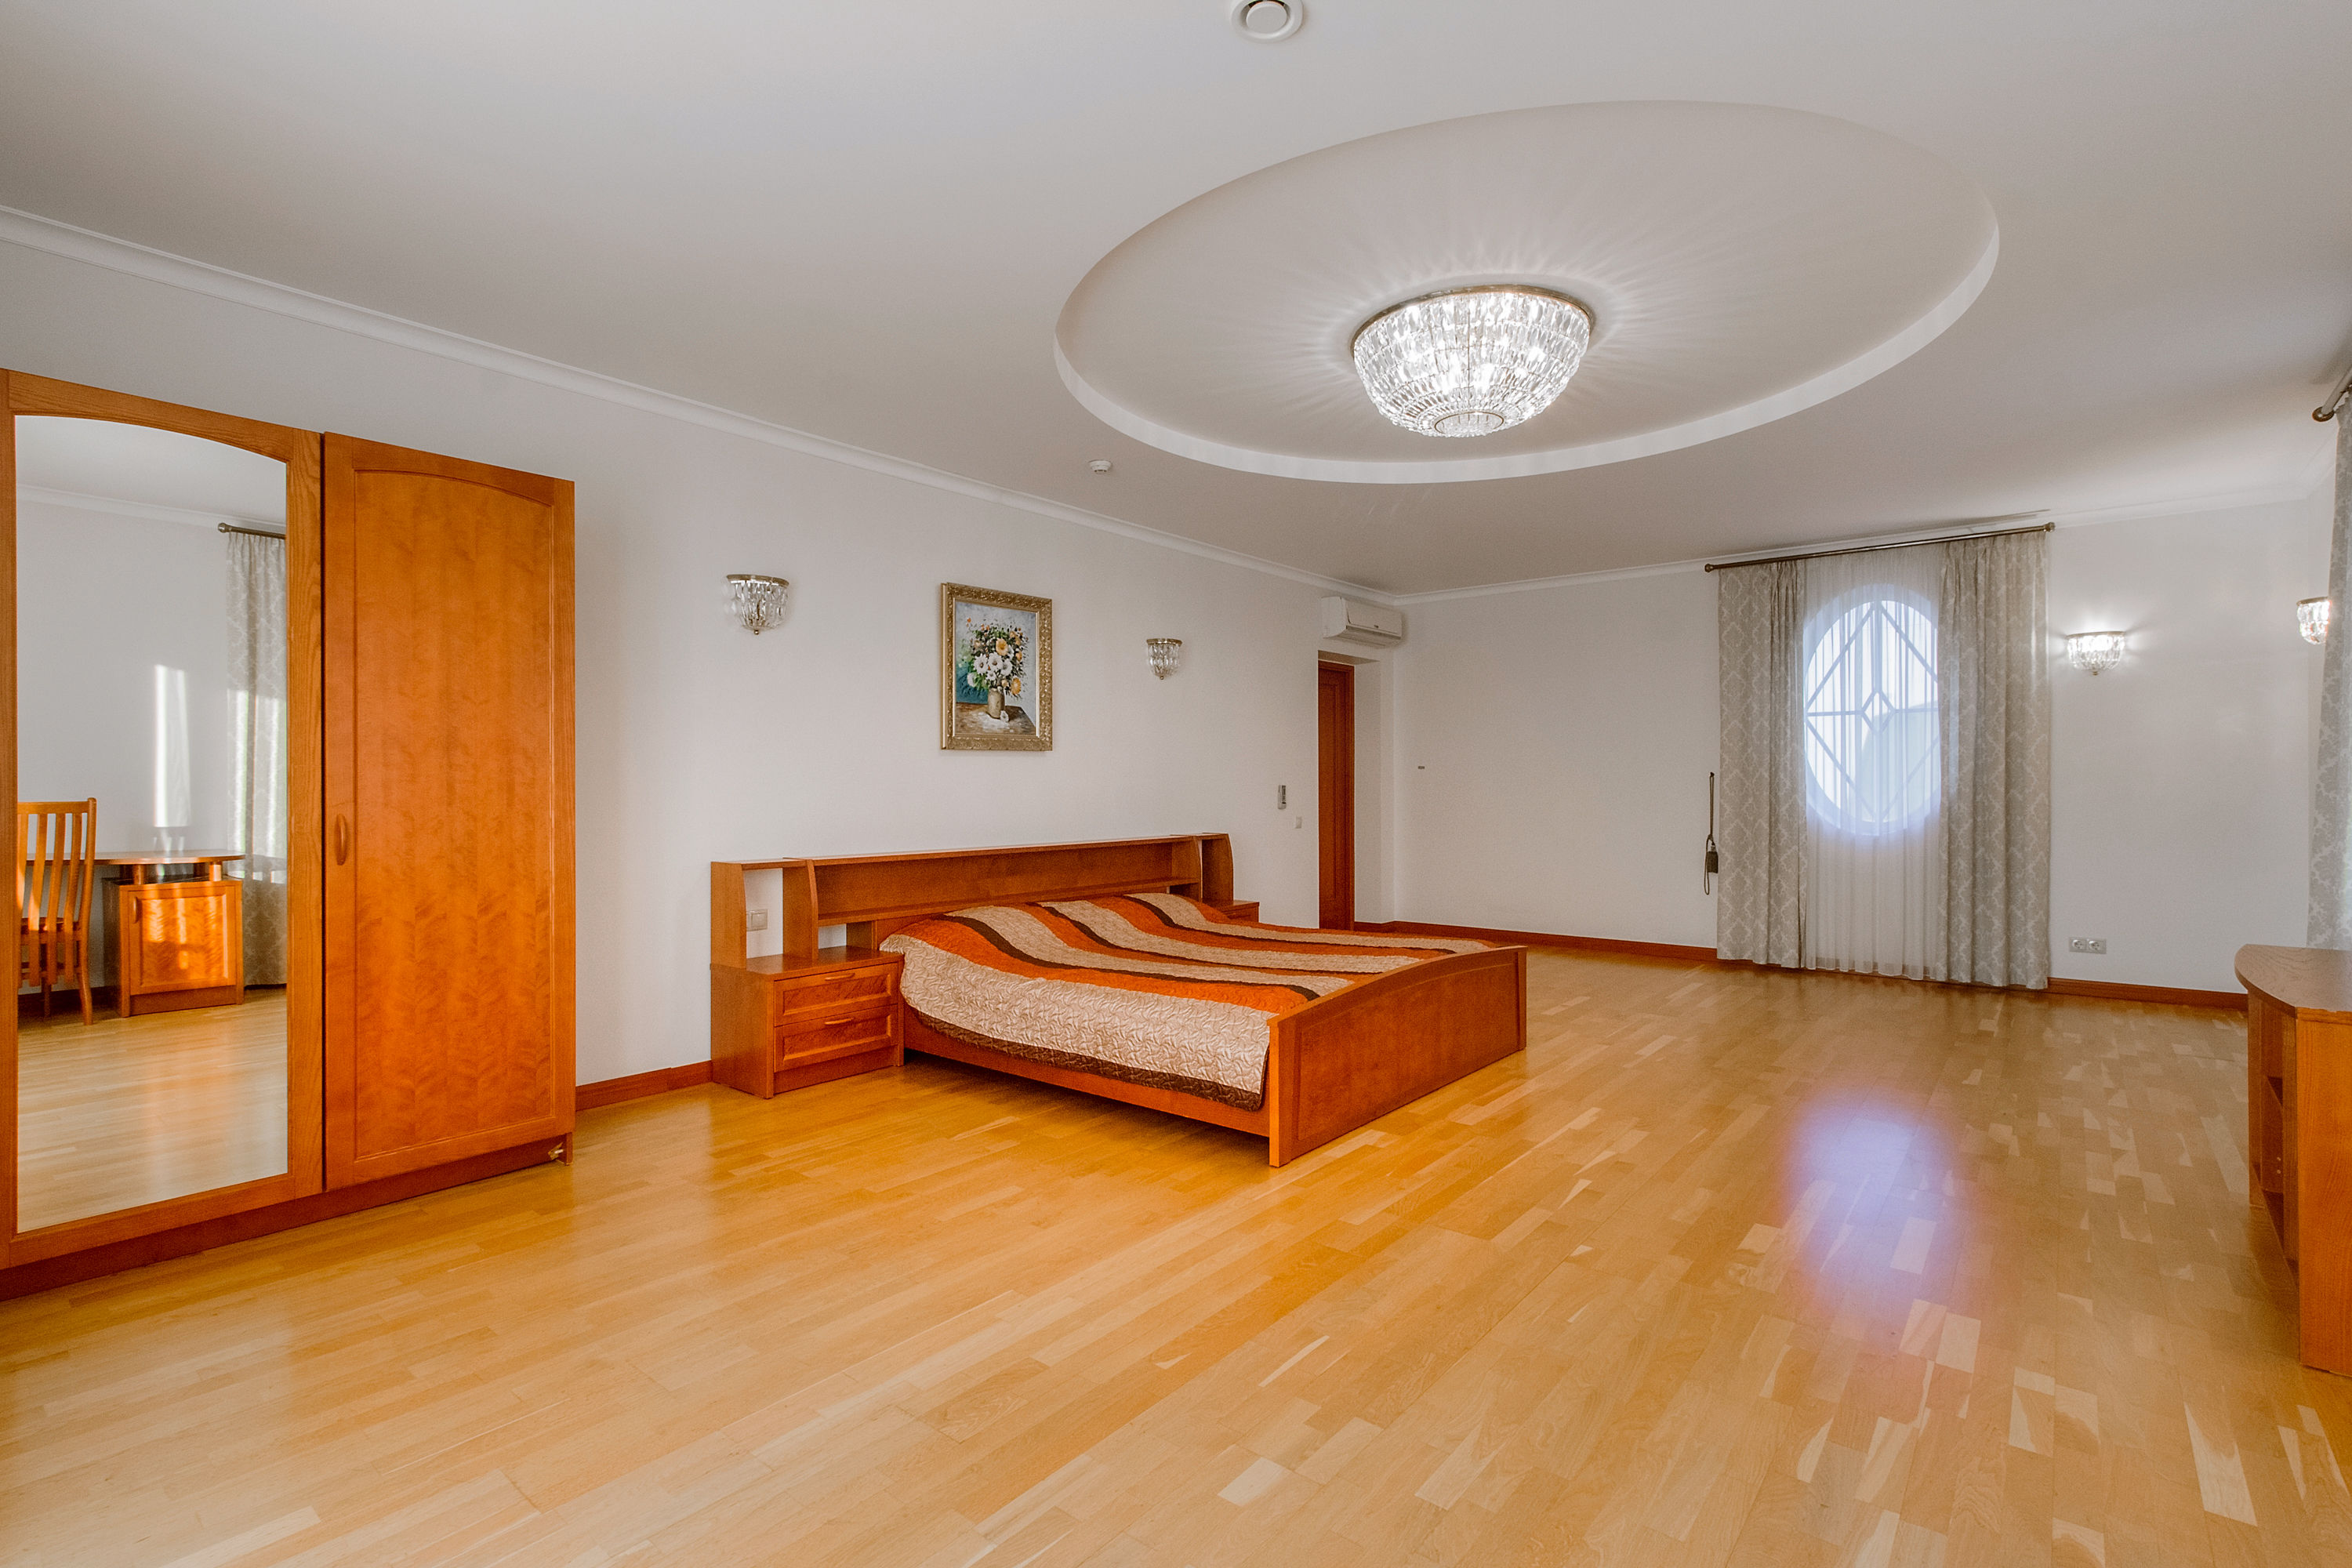 House for sale, Vecais kapteinis - Image 1